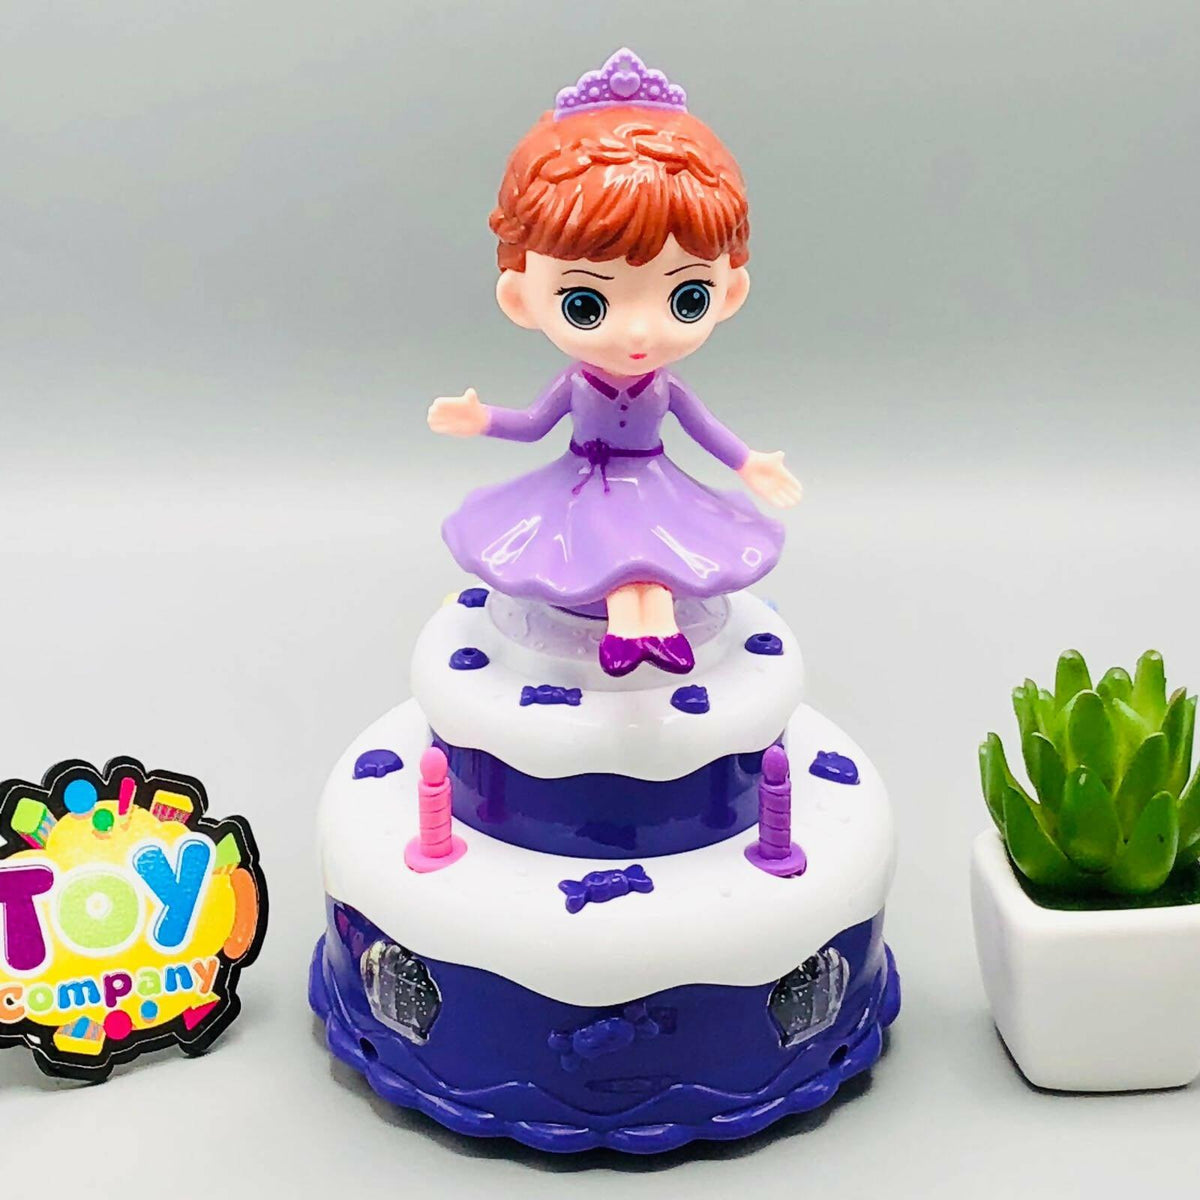 Cute Cake Rotating Snow Doll With Light & Music - ValueBox